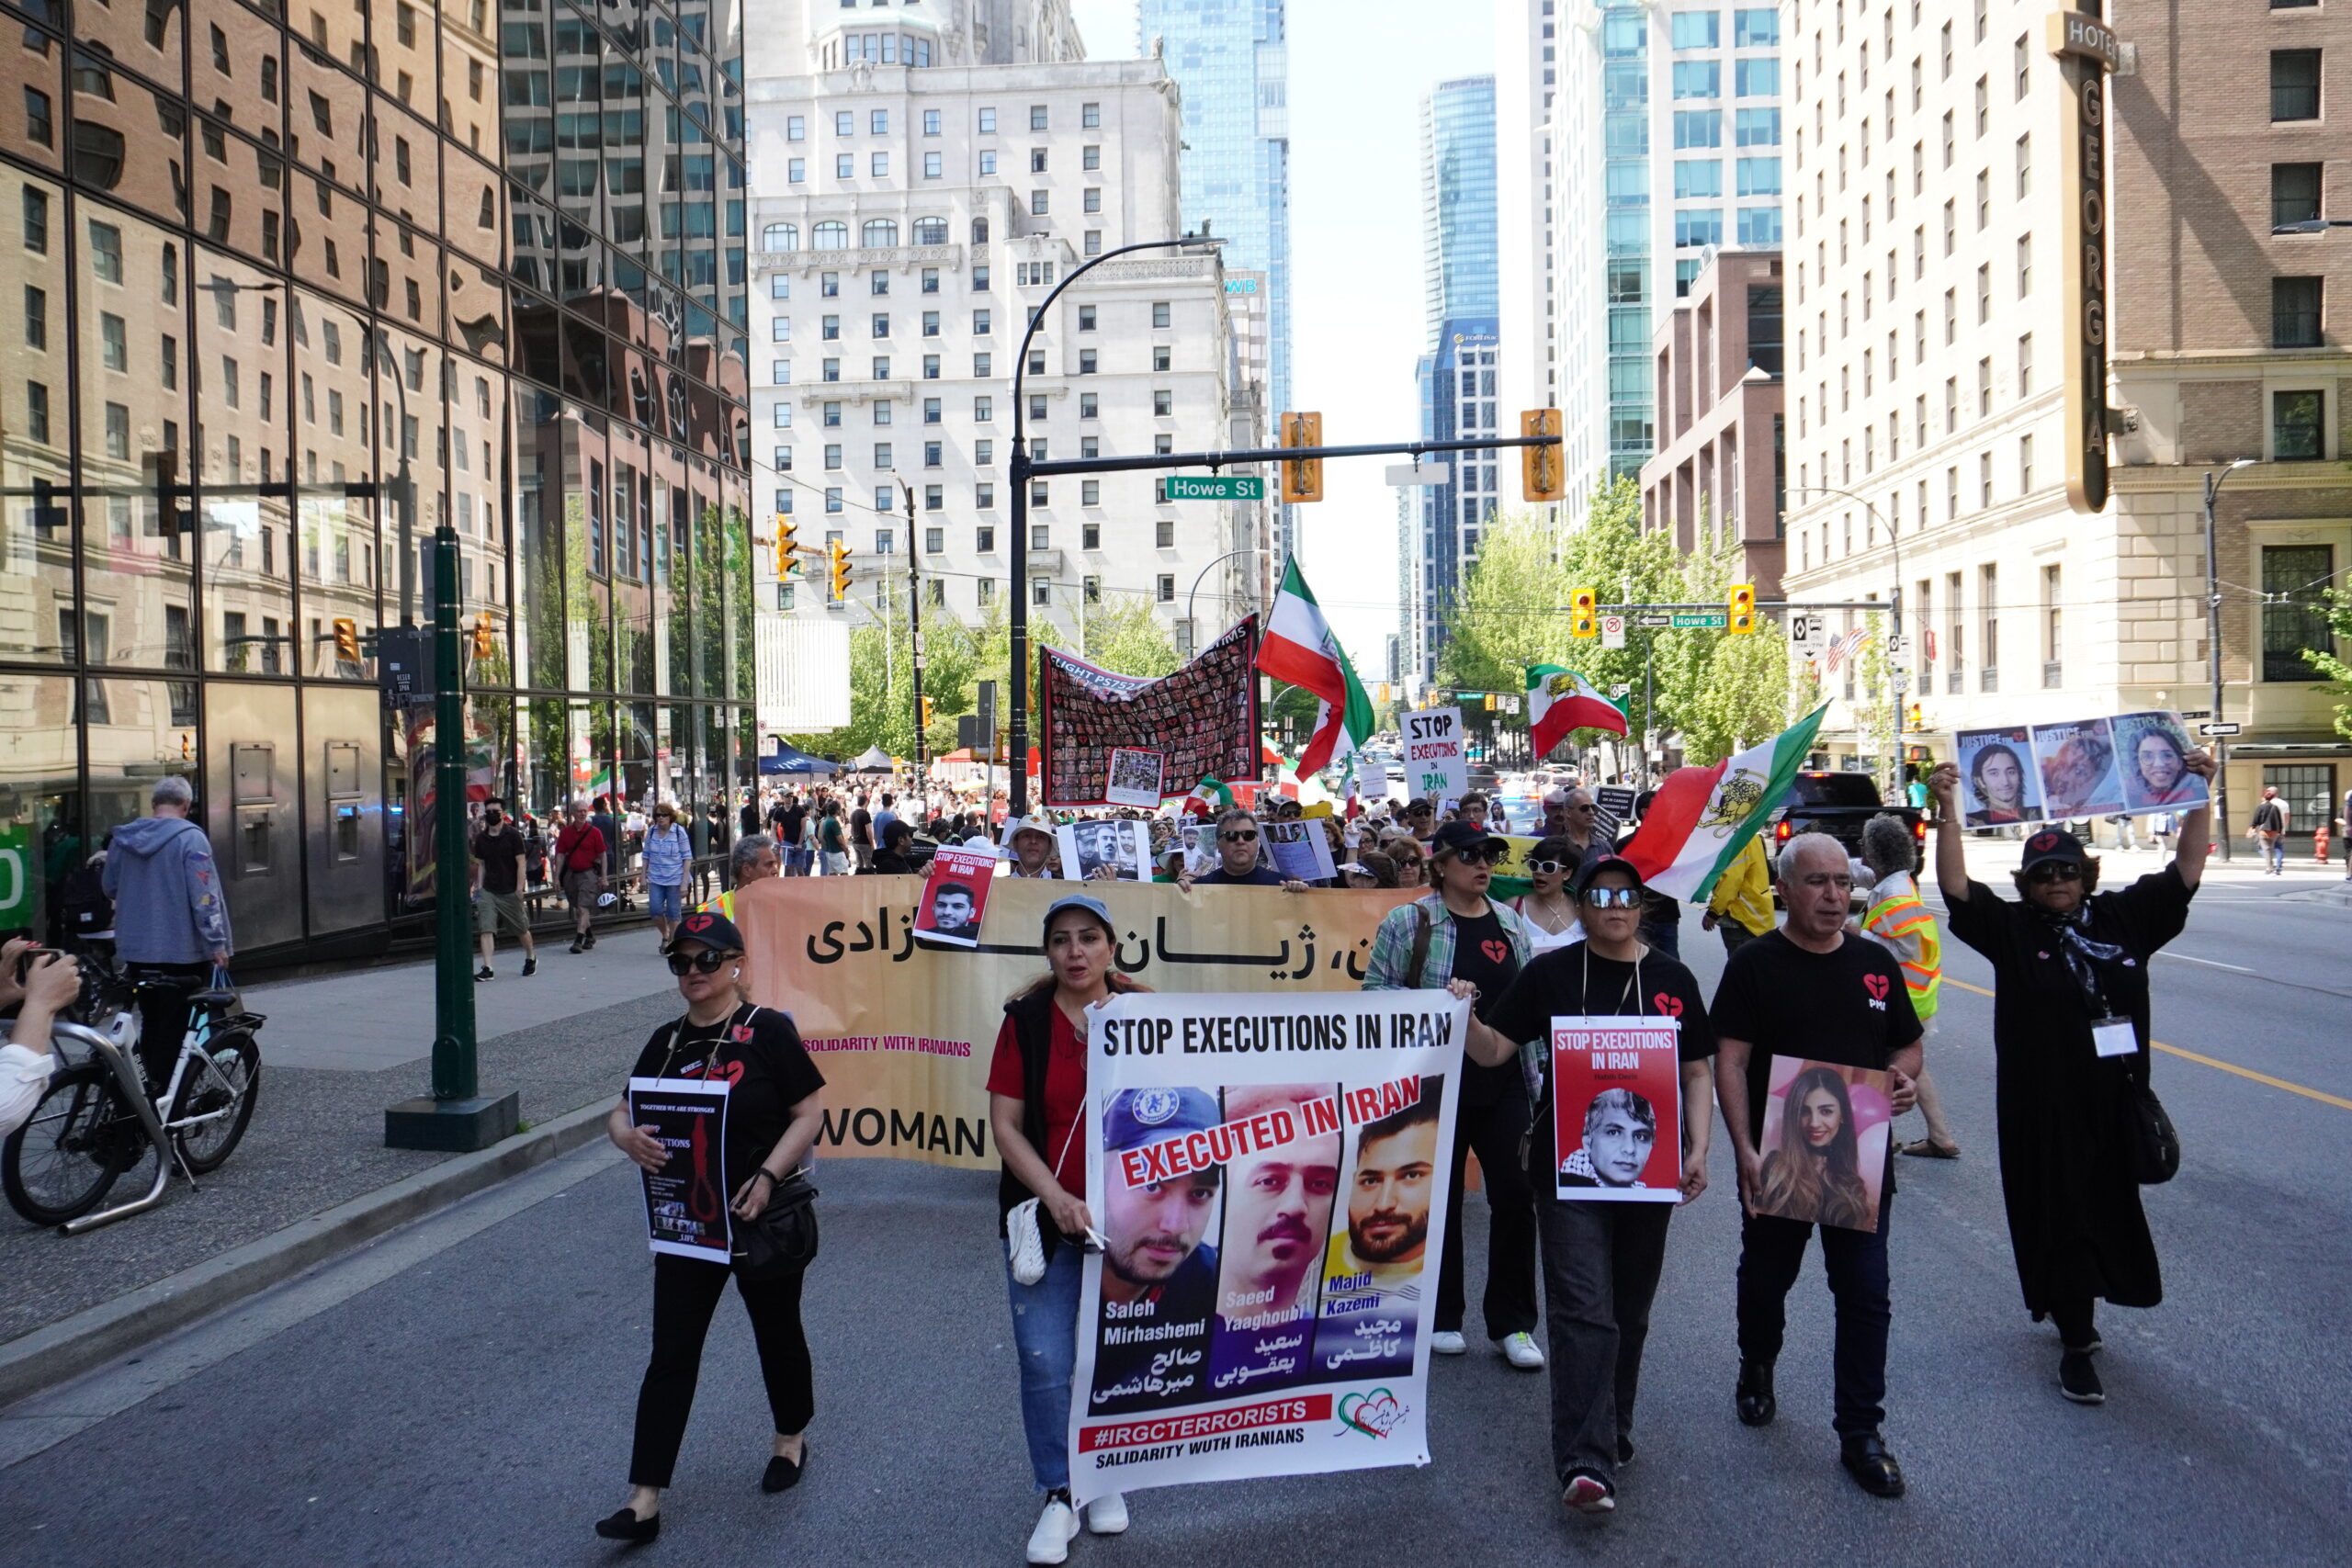 Protesters march in Vancouver on May 20 holding signs that condemn unlawful executions in Iran